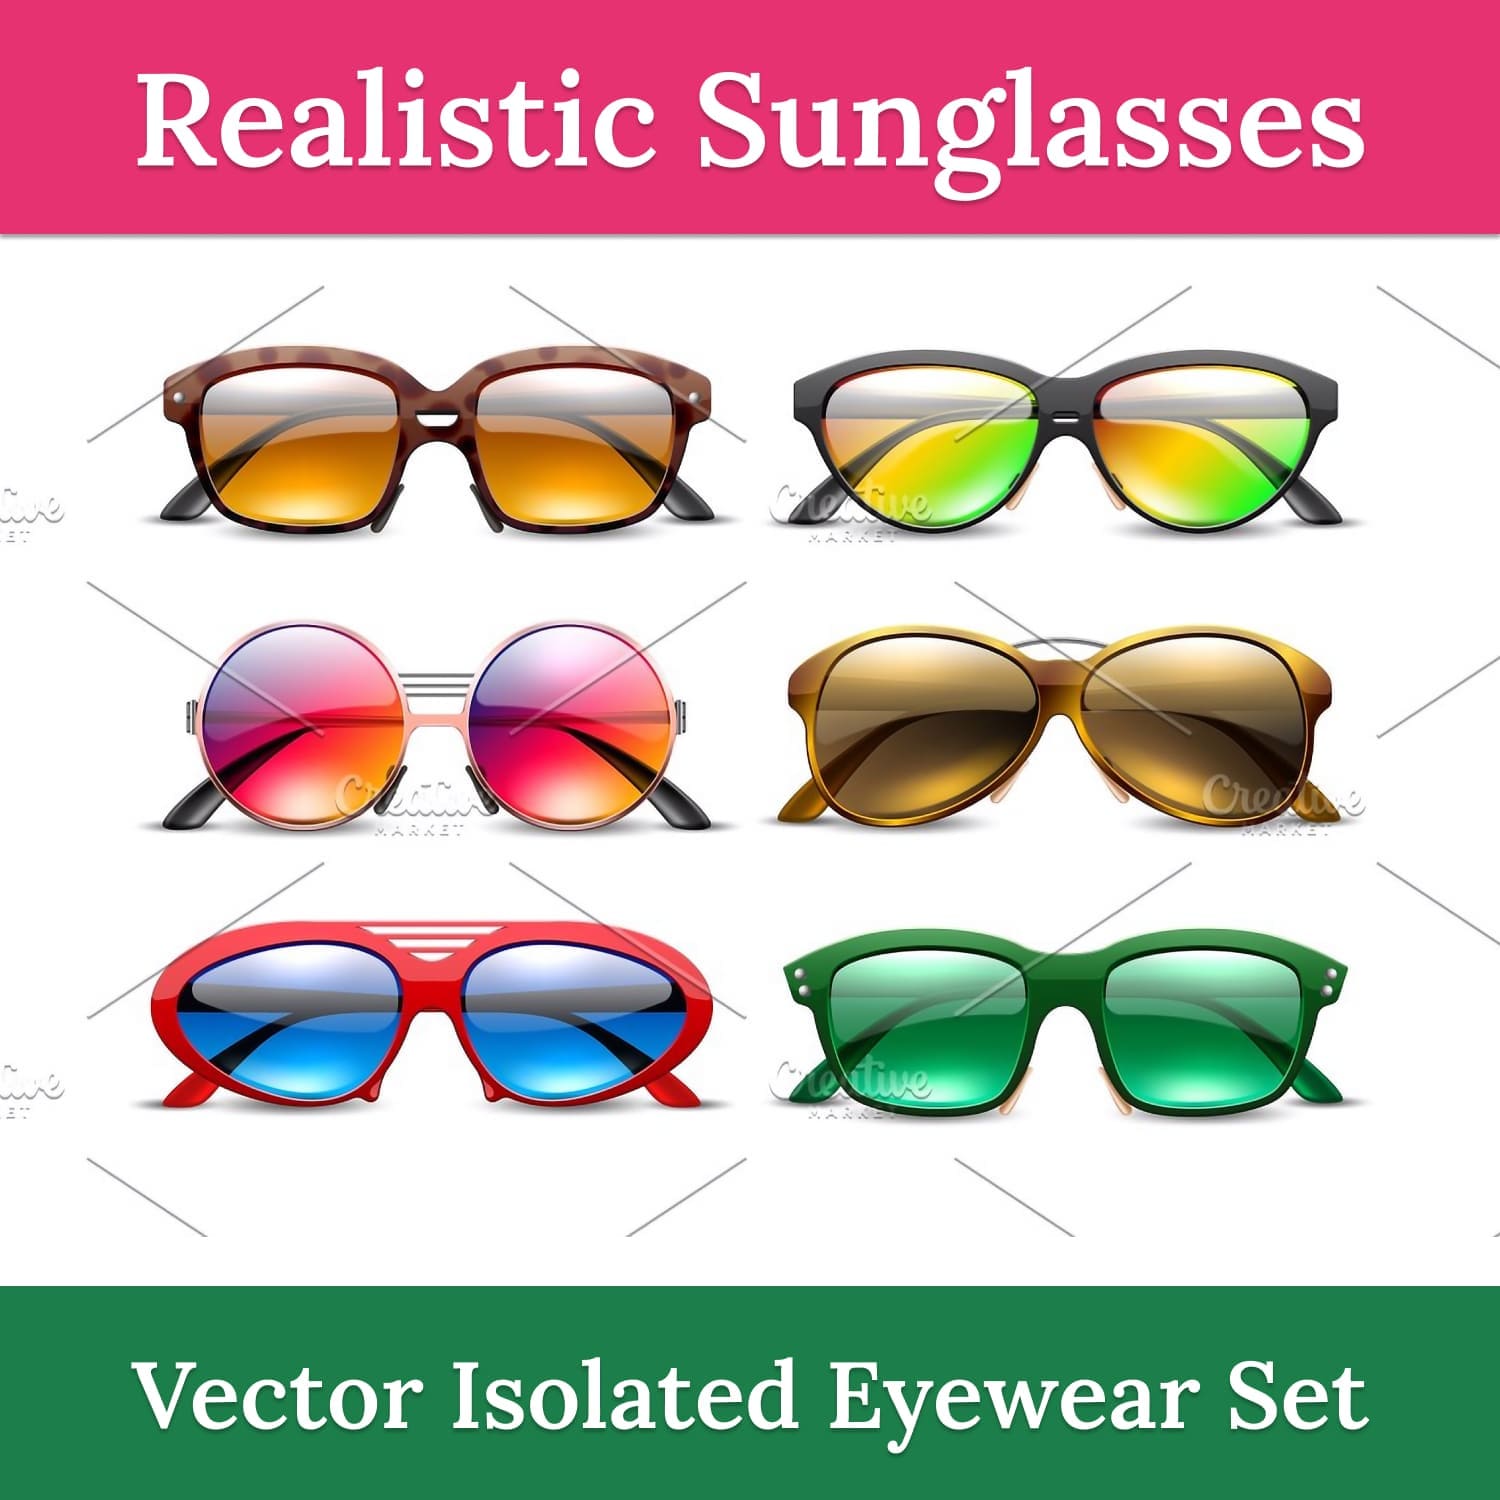 Realistic sunglasses. tinted eyewear, main picture.